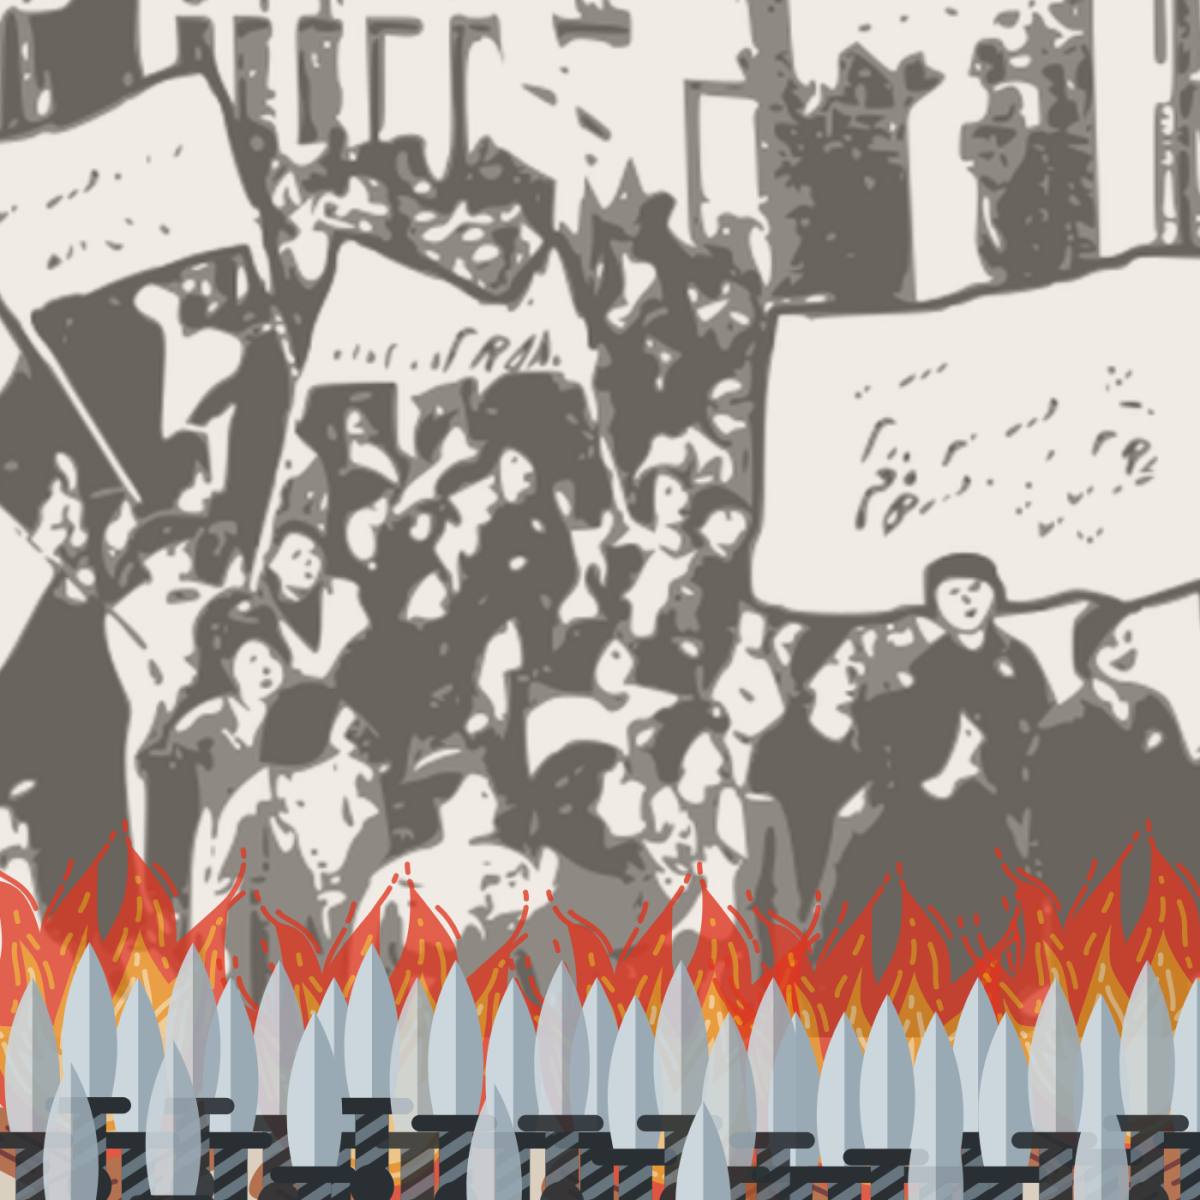 A faded photo of cartoon protesters holding signs stands behind a bottom border of cartoon knifes and flames.